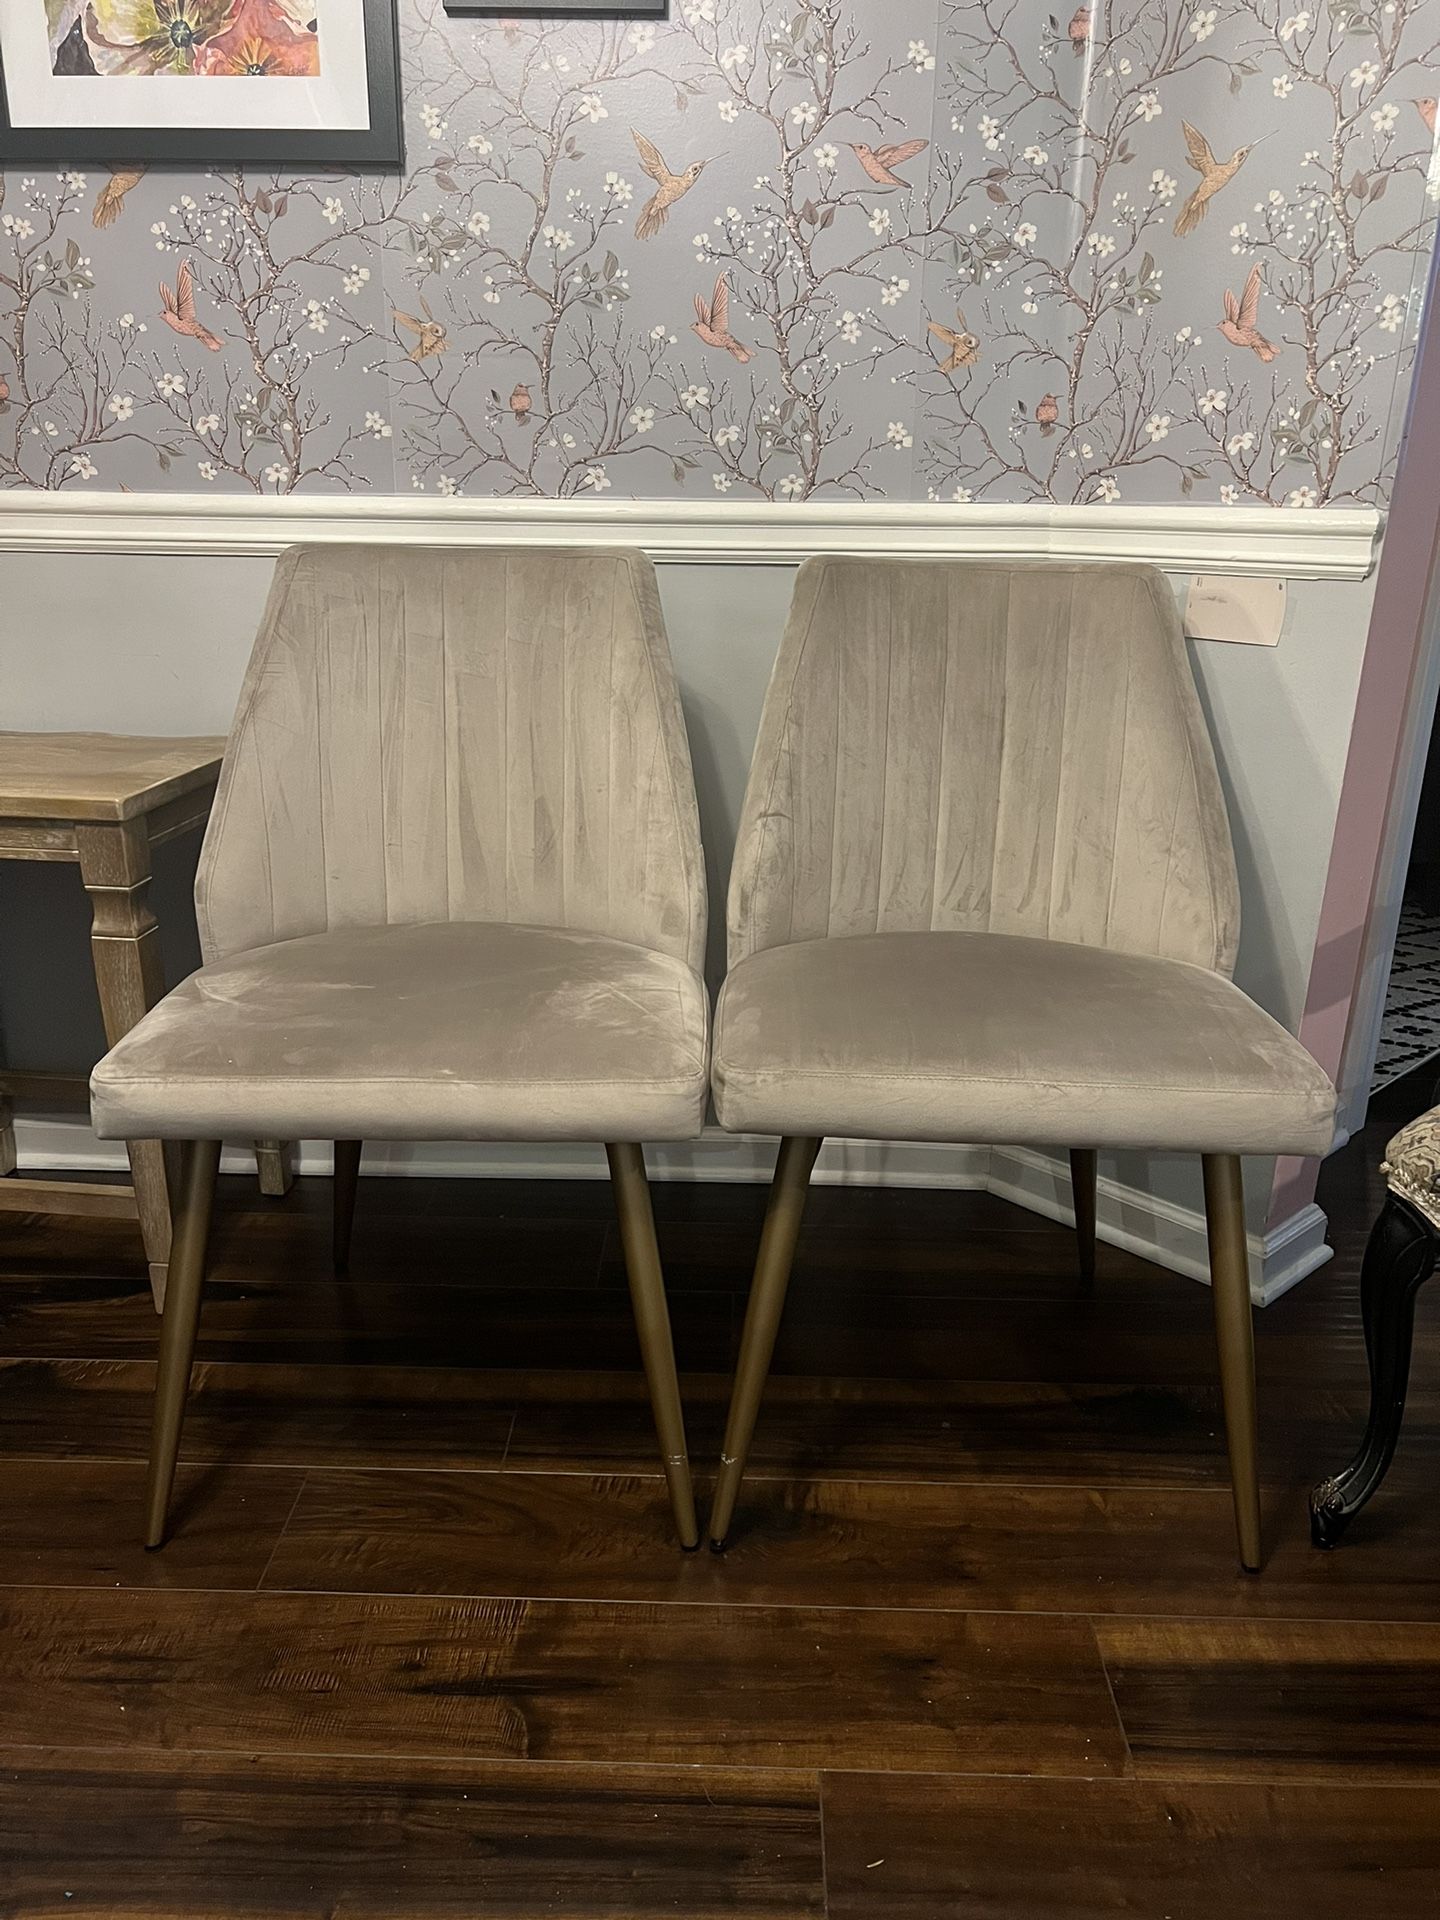 Two Velvet Dining Chairs Like West Elm